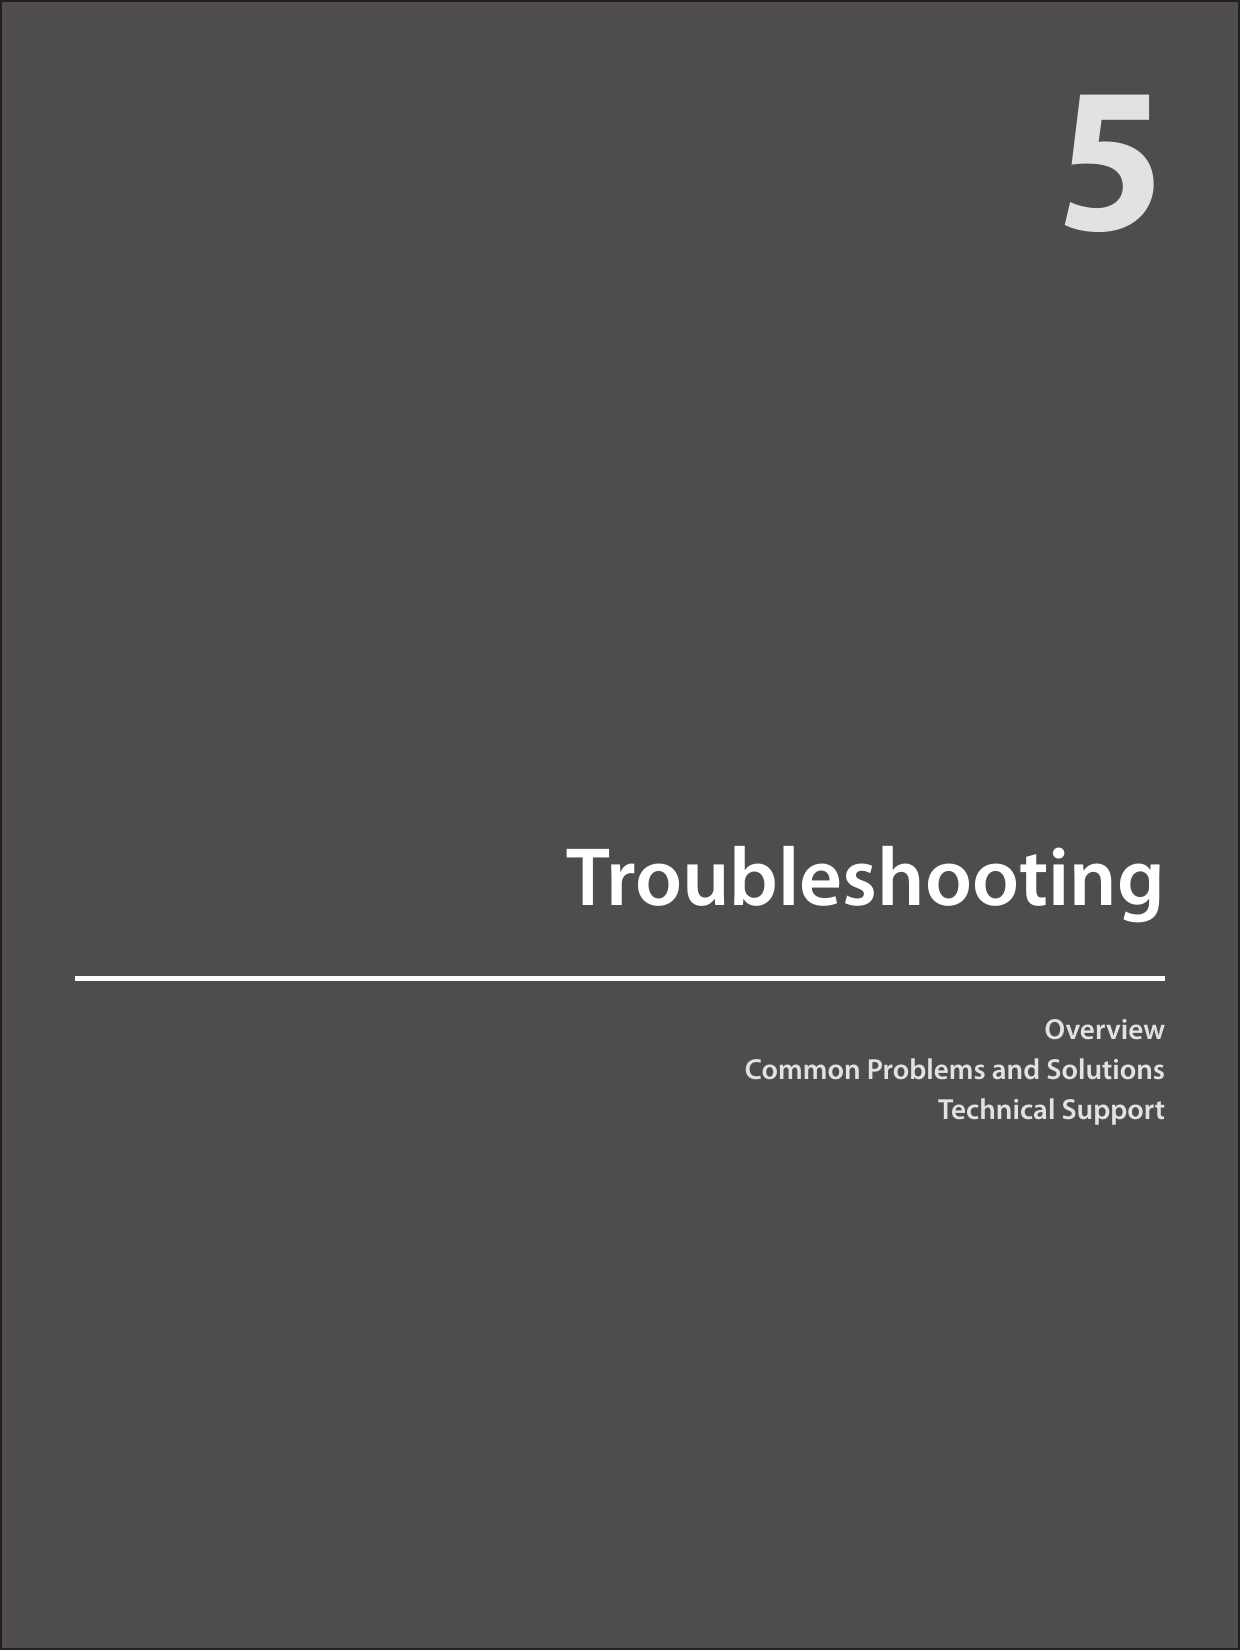 OverviewCommon Problems and SolutionsTechnical SupportTroubleshooting5